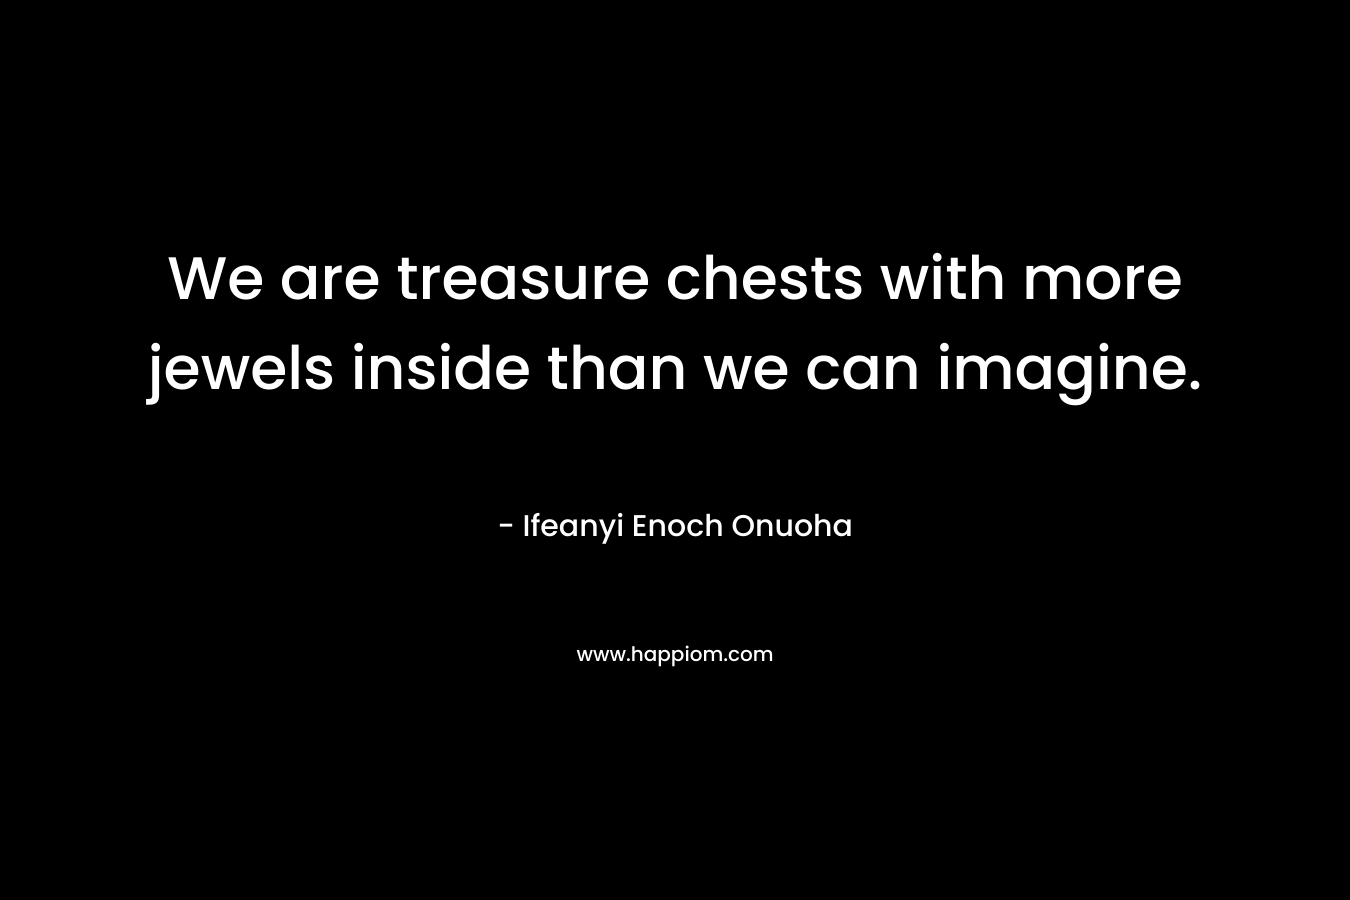 We are treasure chests with more jewels inside than we can imagine.